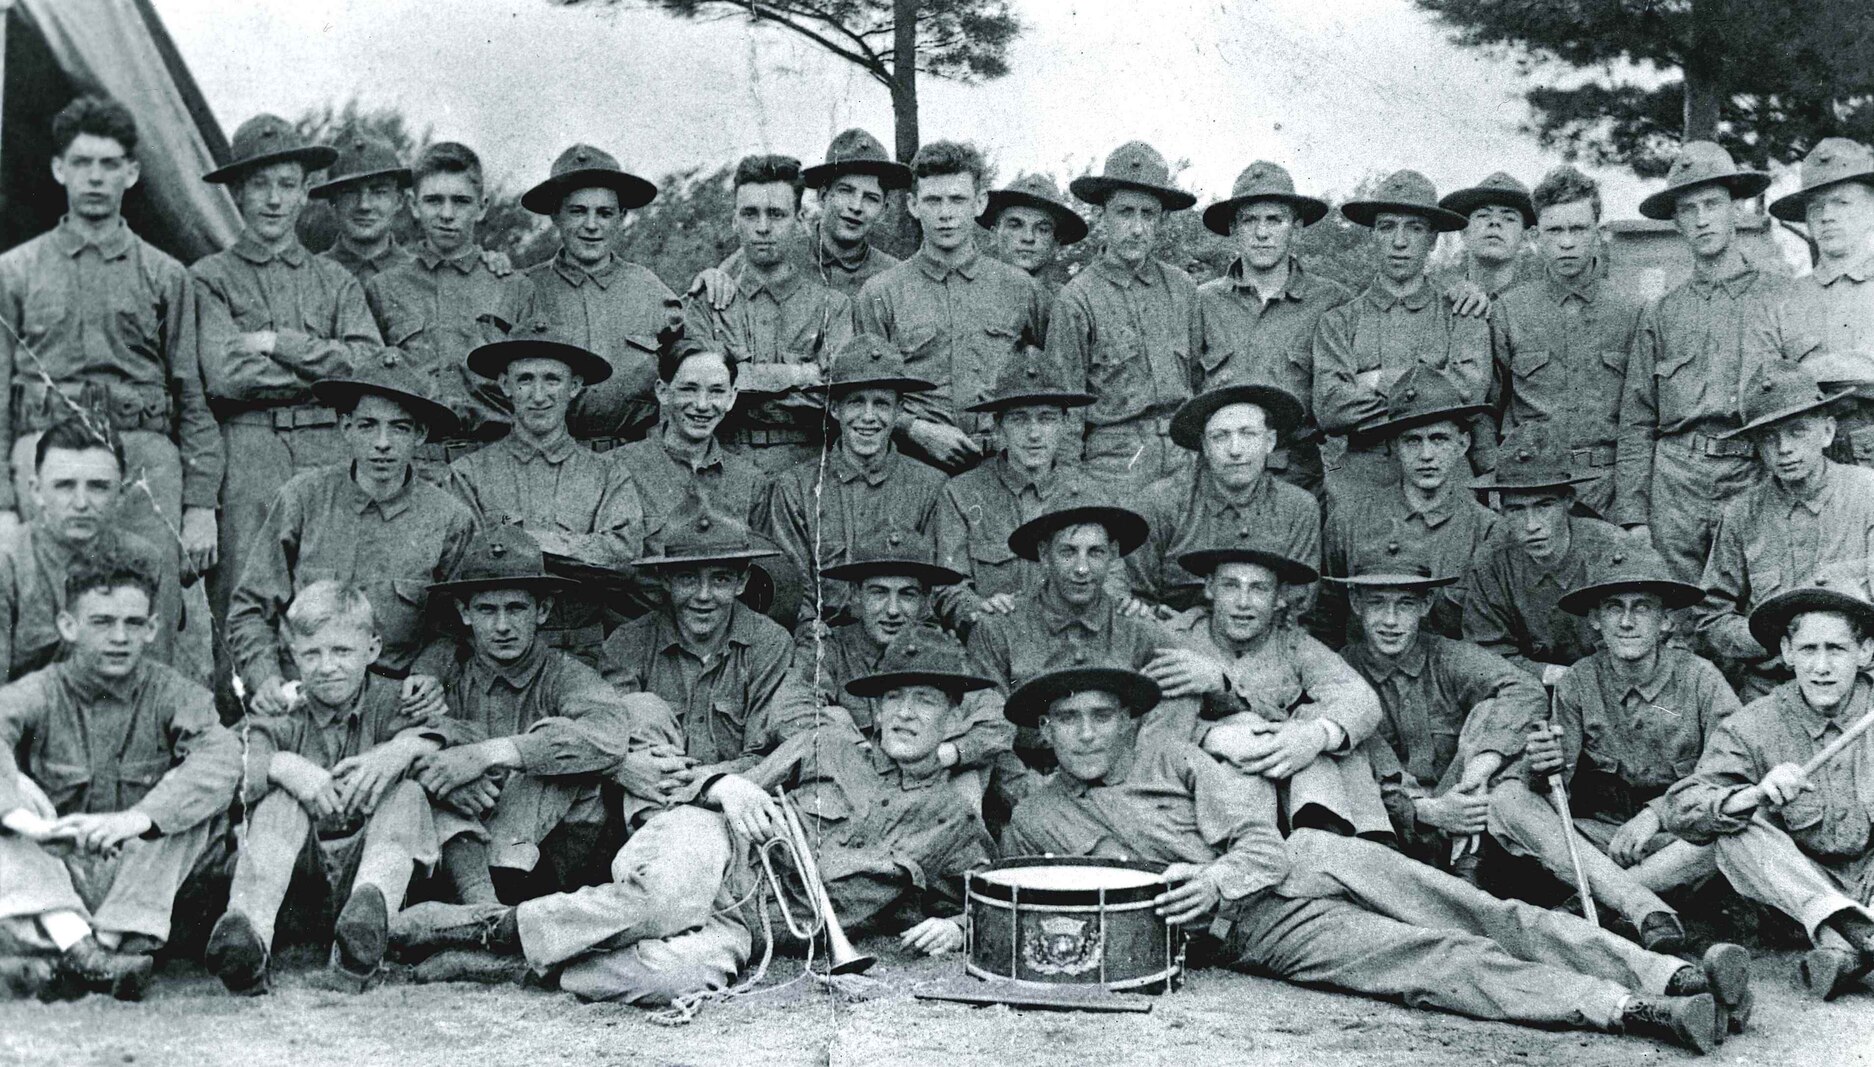 Members of the first Reserve unit formed at Brooklyn in 1916.